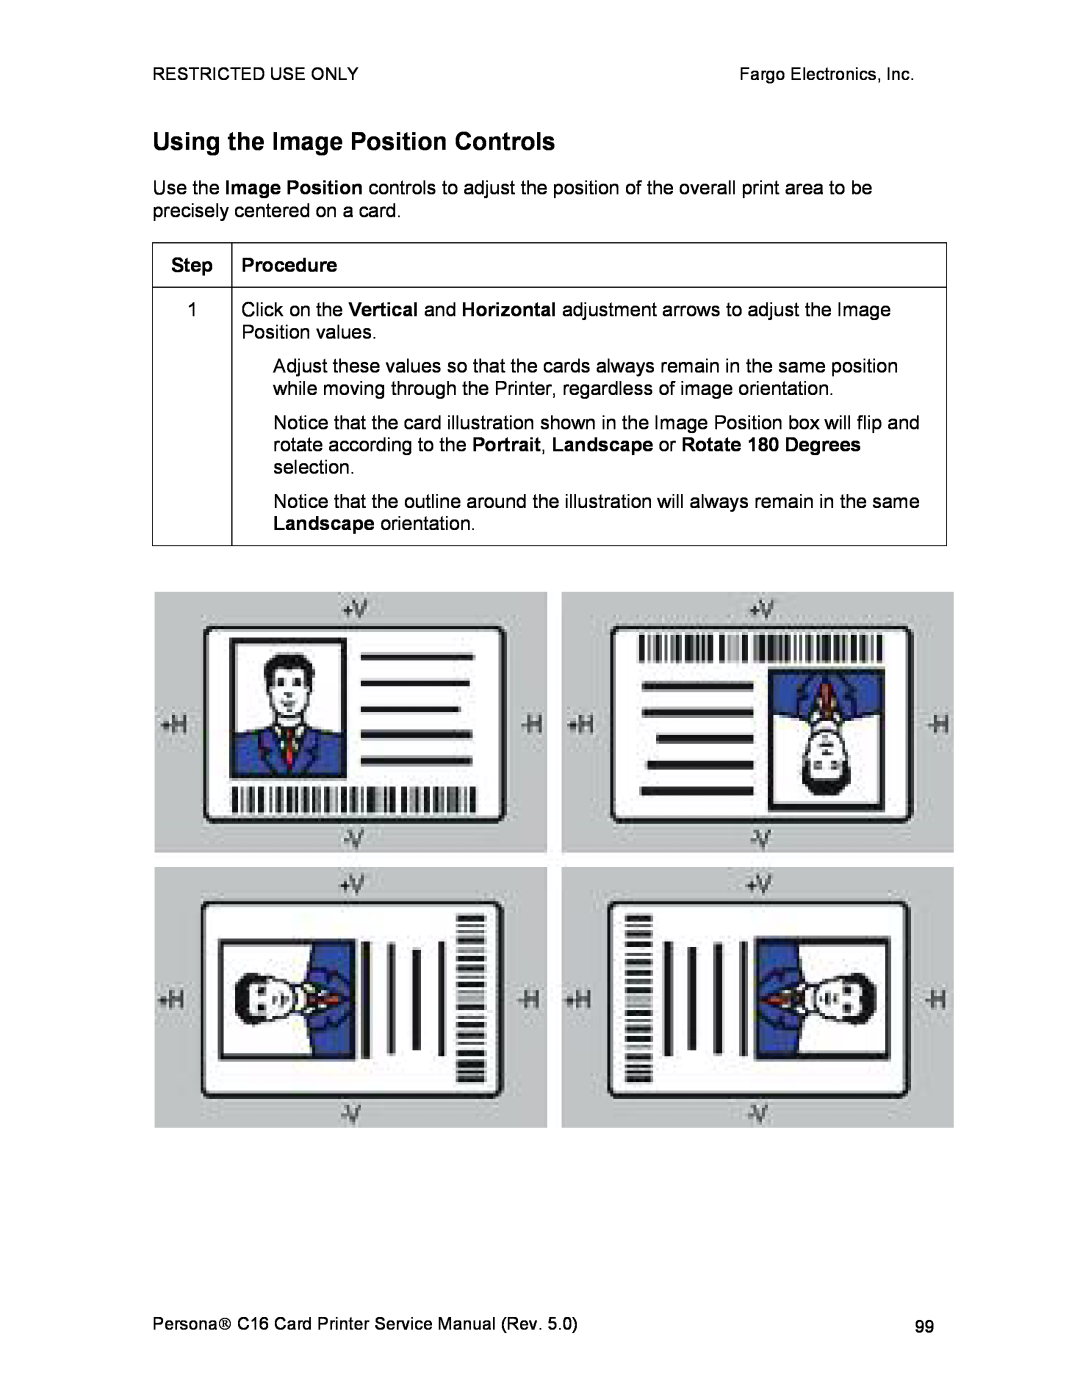 FARGO electronic C16 service manual Using the Image Position Controls 